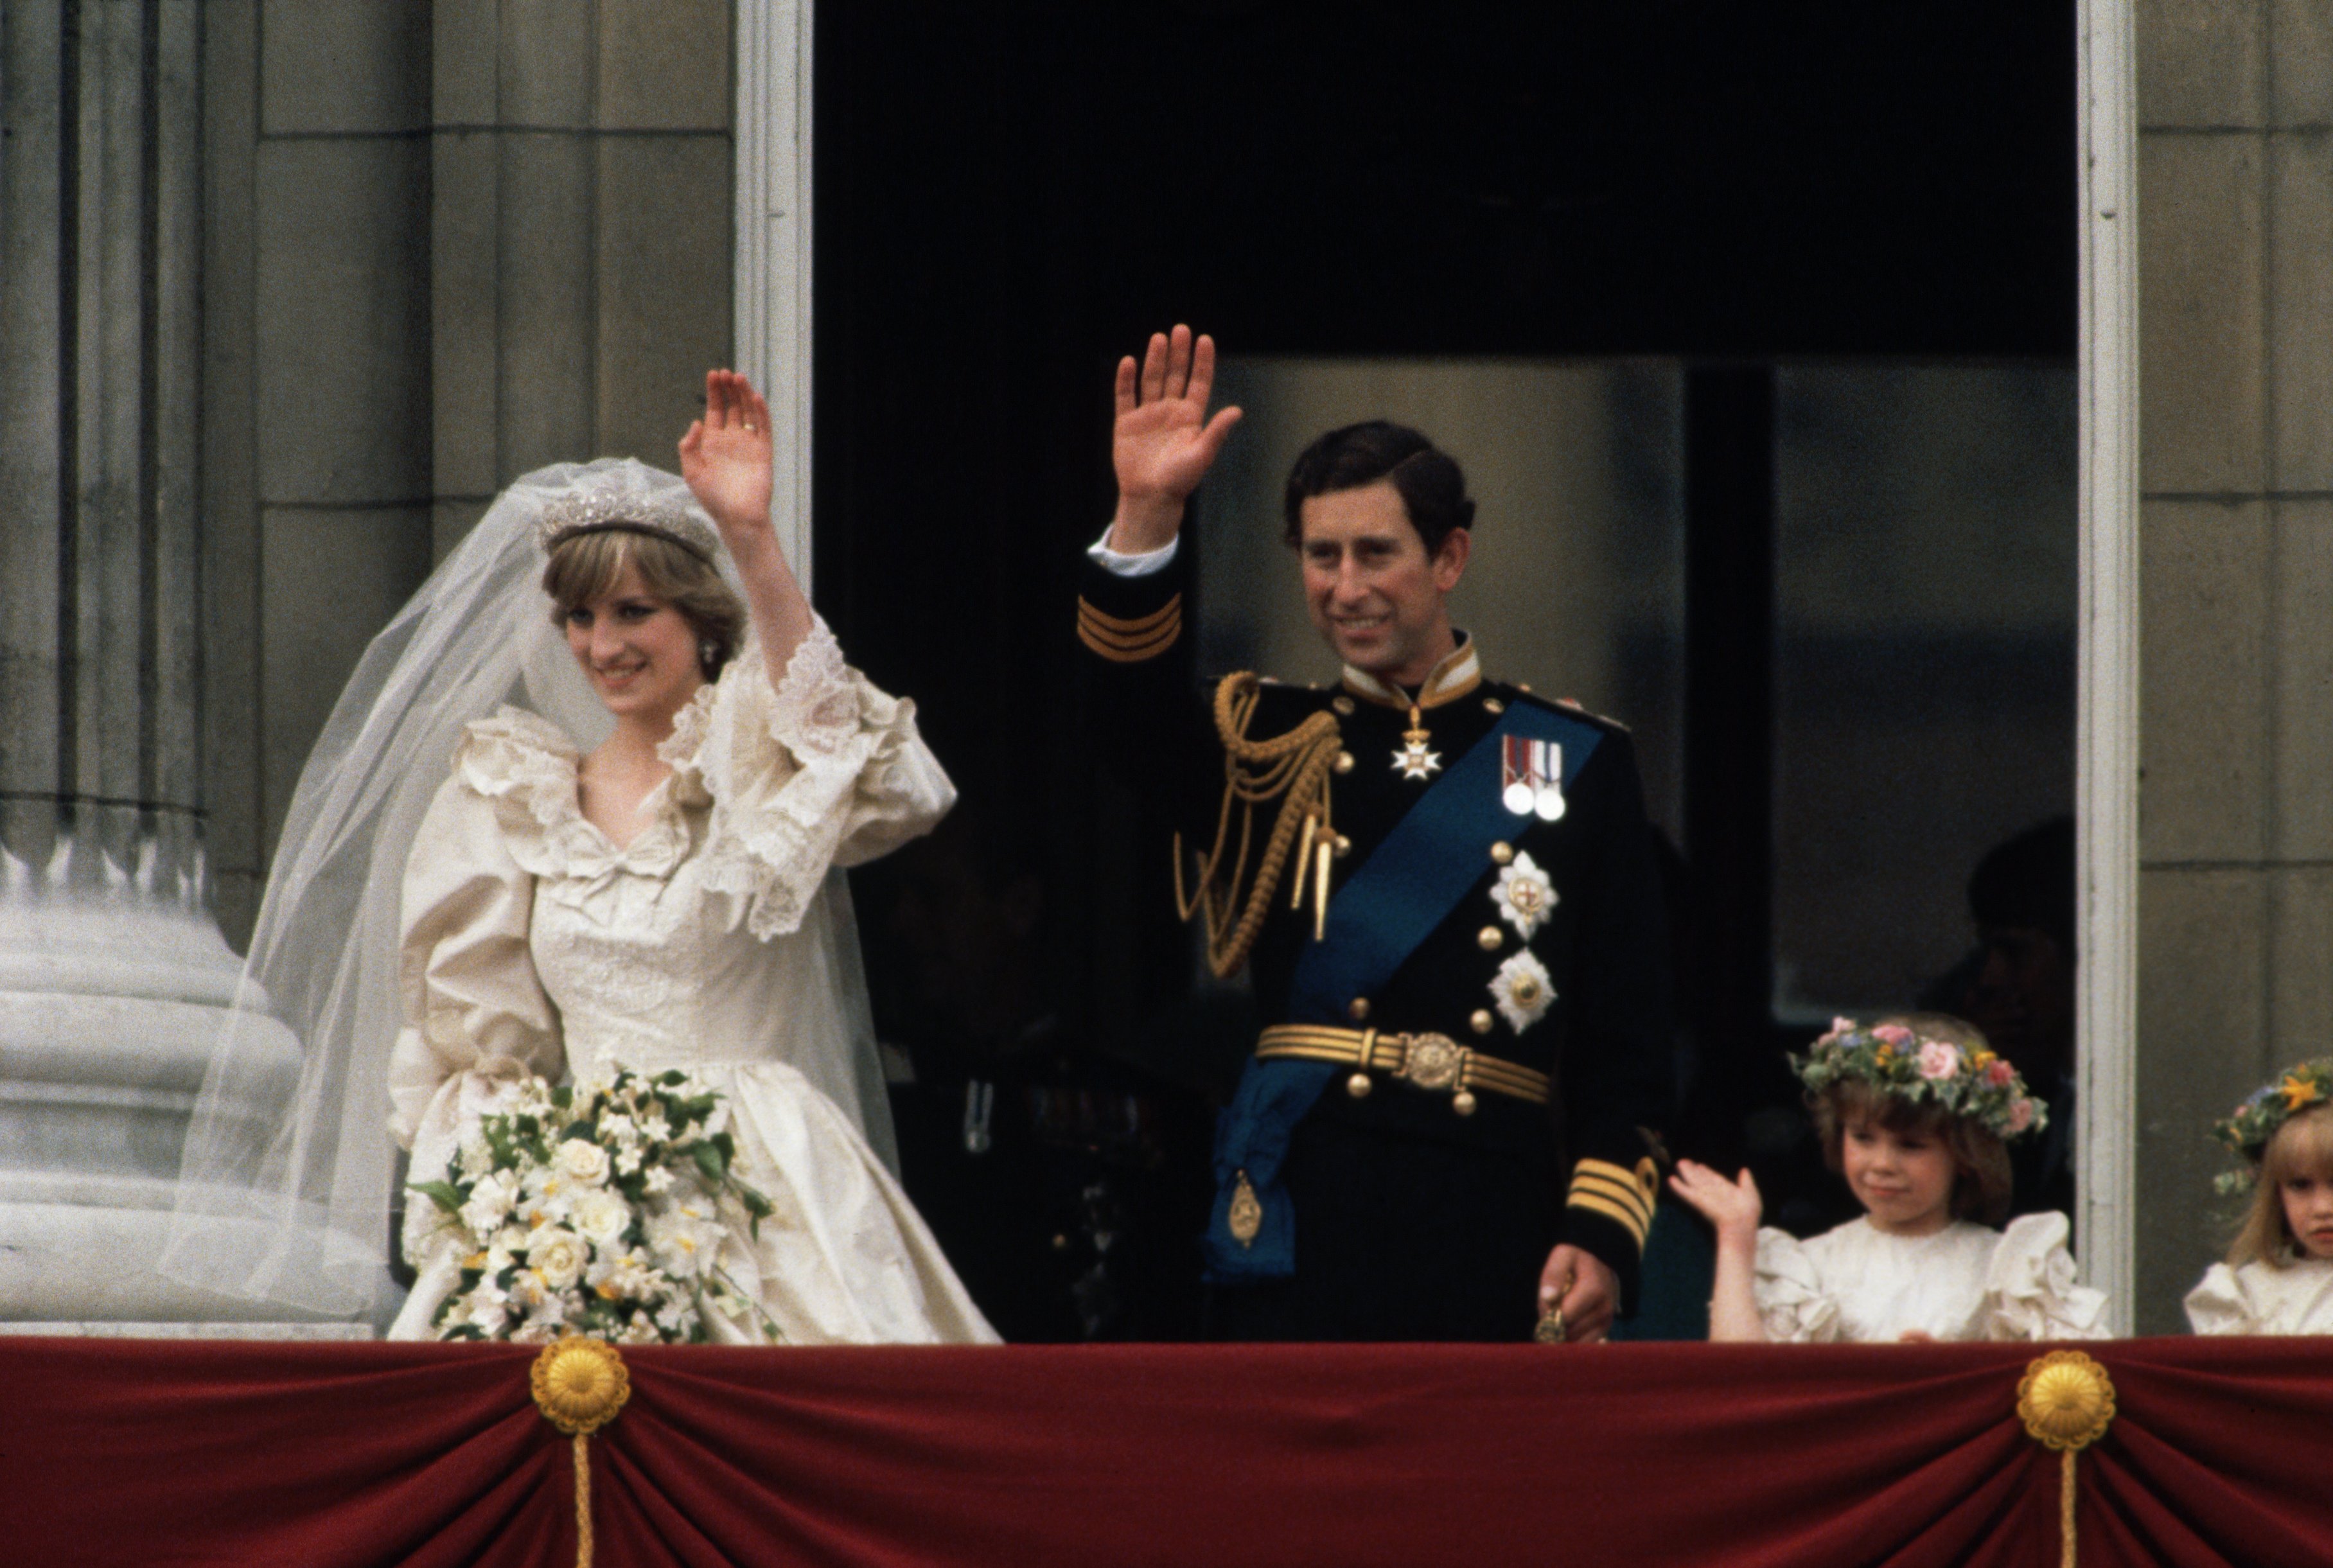 Princess Diana and Prince Charles wave to onlookers from the balcony at Buckingham Palace just after their wedding | Photo: Getty Images